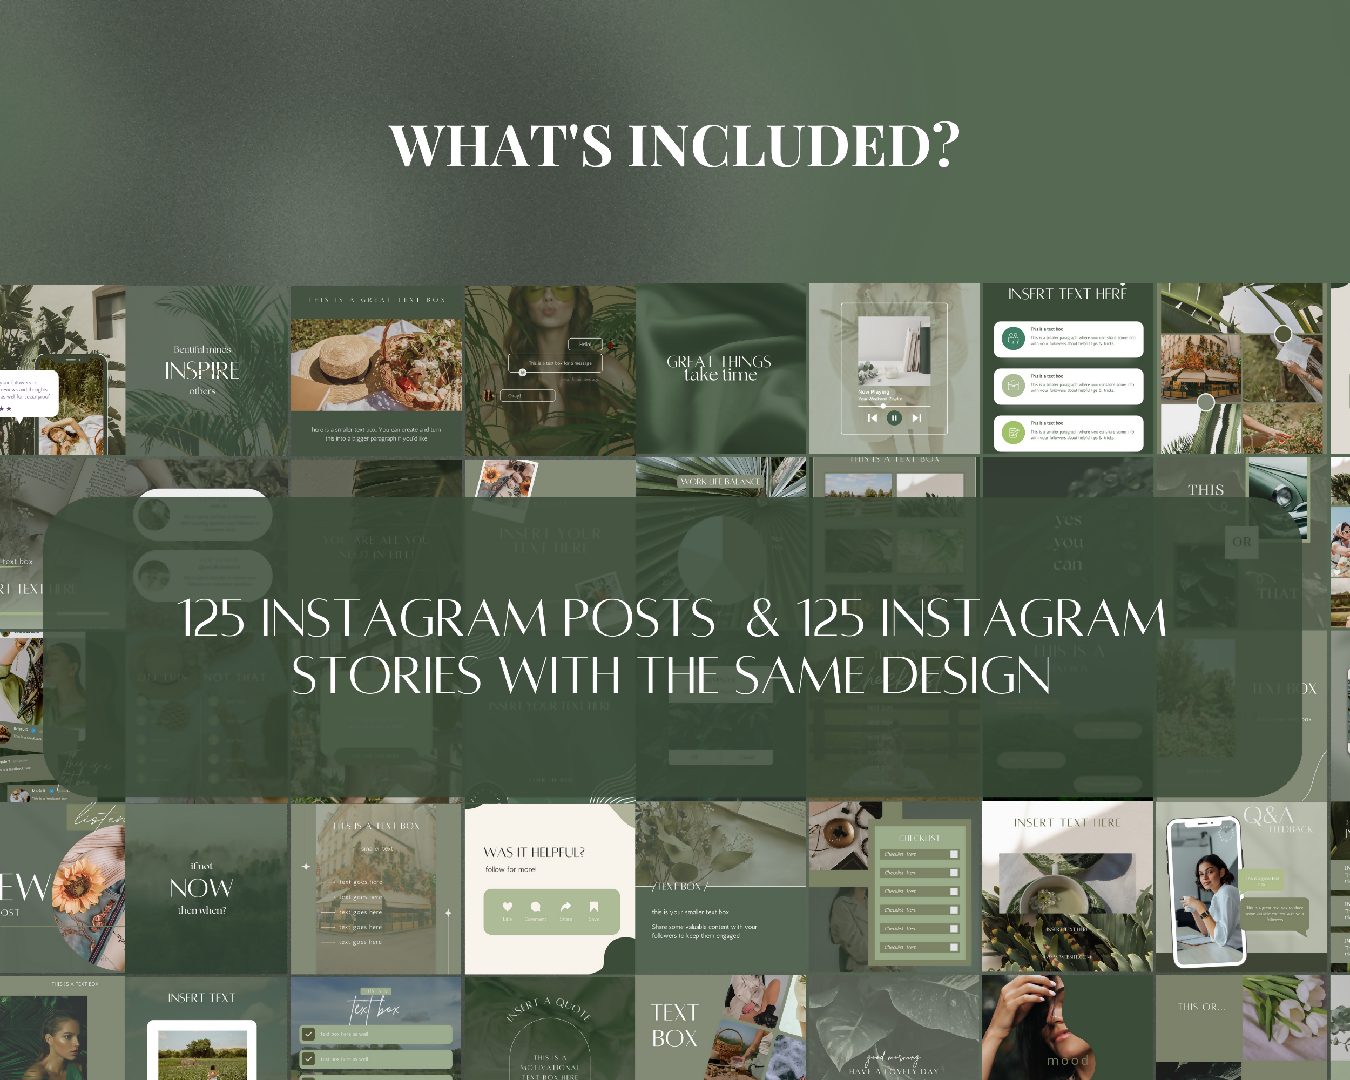 250 Green Instagram Templates, Green Social Media Tropical Instagram Post and Story Templates